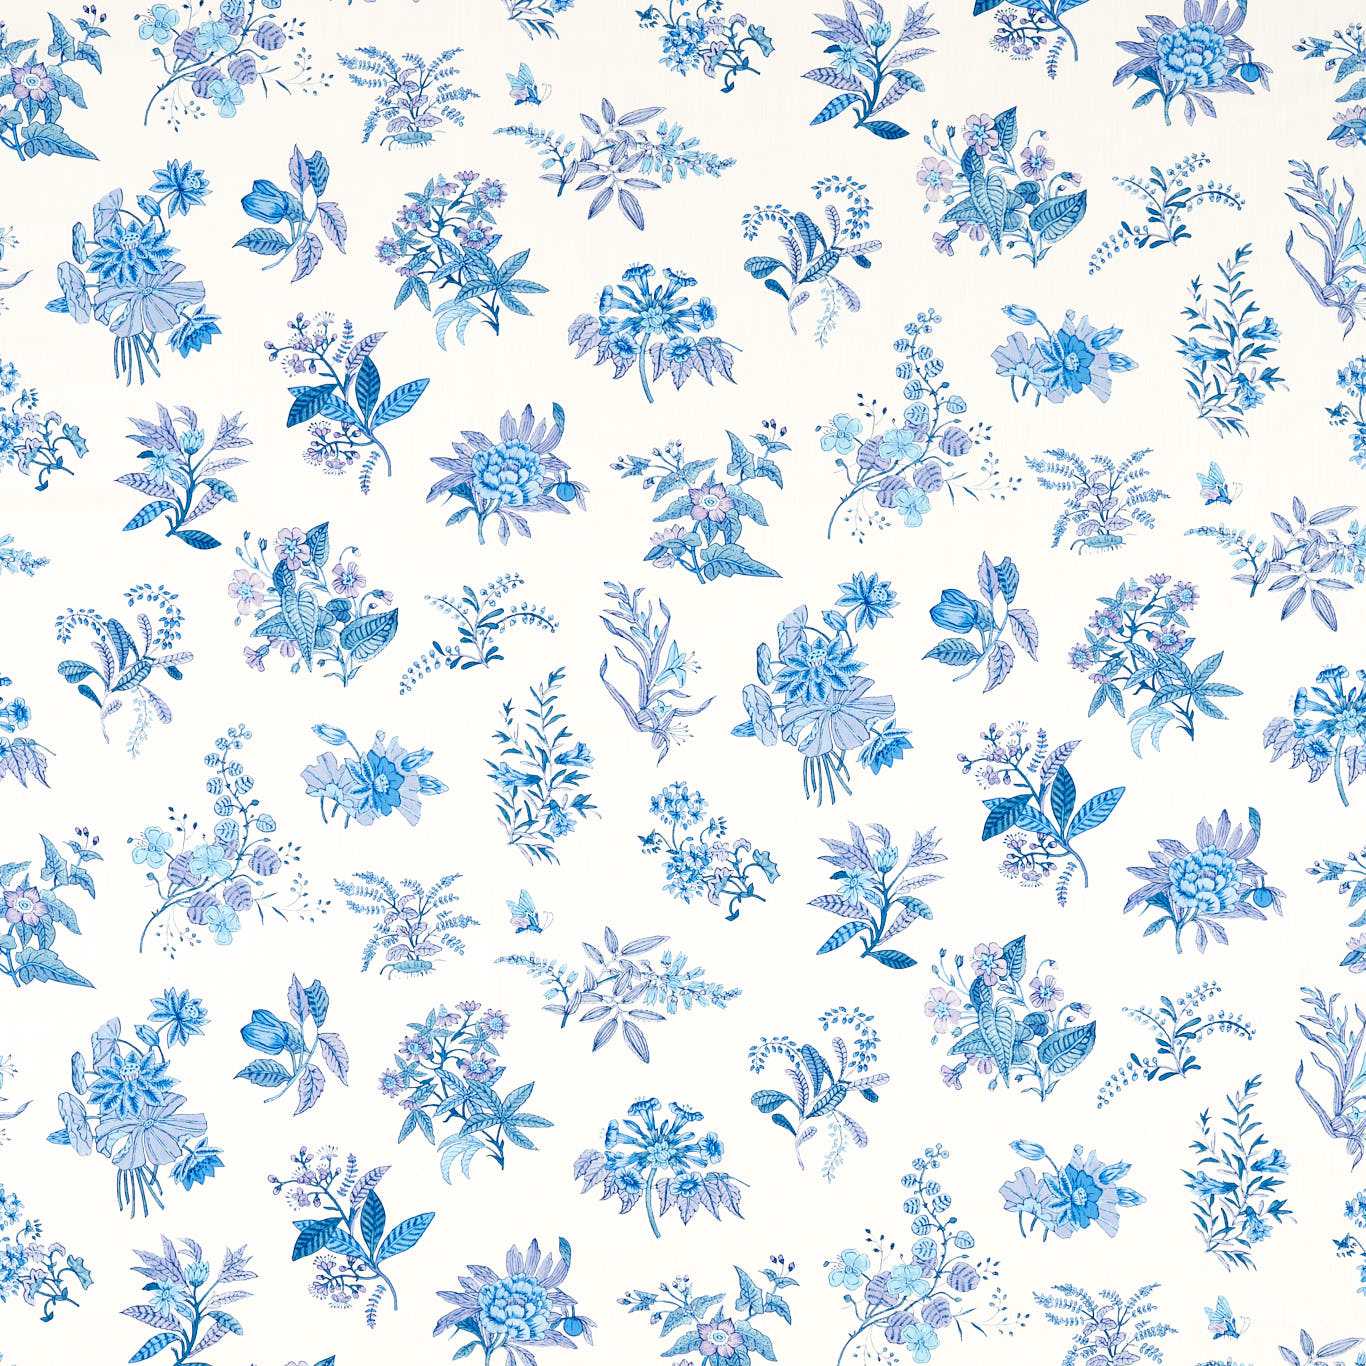 Woodland Floral Fabric - Lapis/Amethyst/Pearl